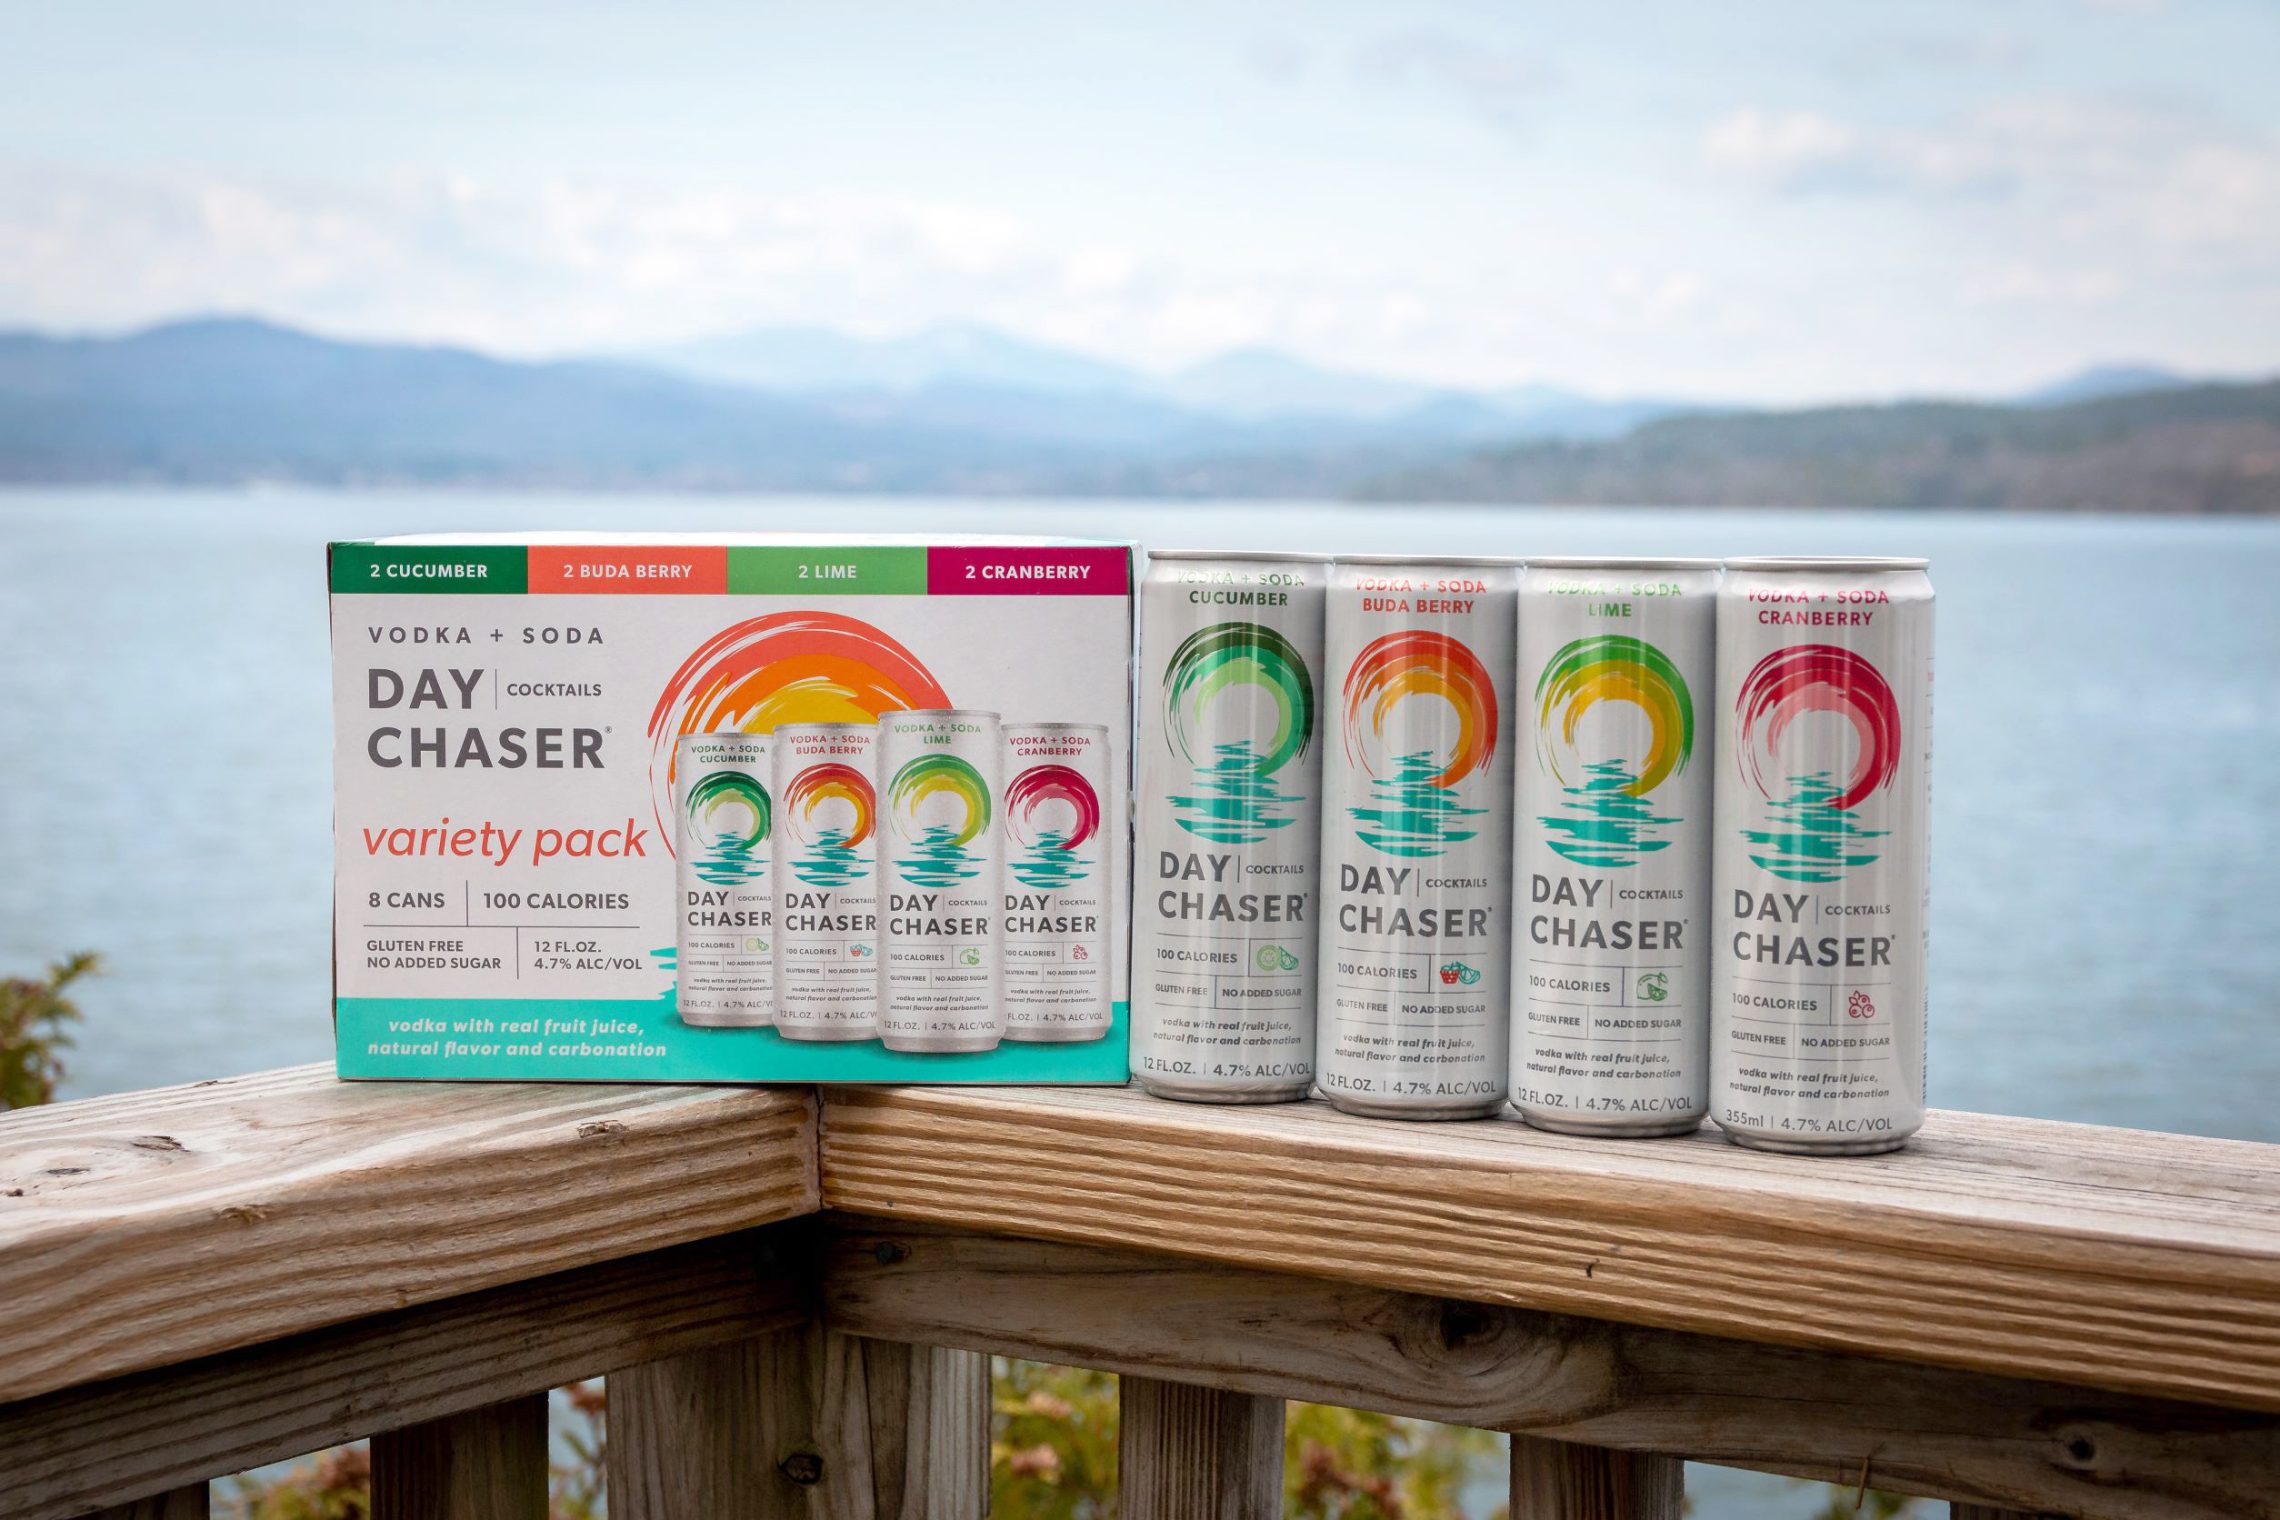 Day Chaser Cocktails variety pack